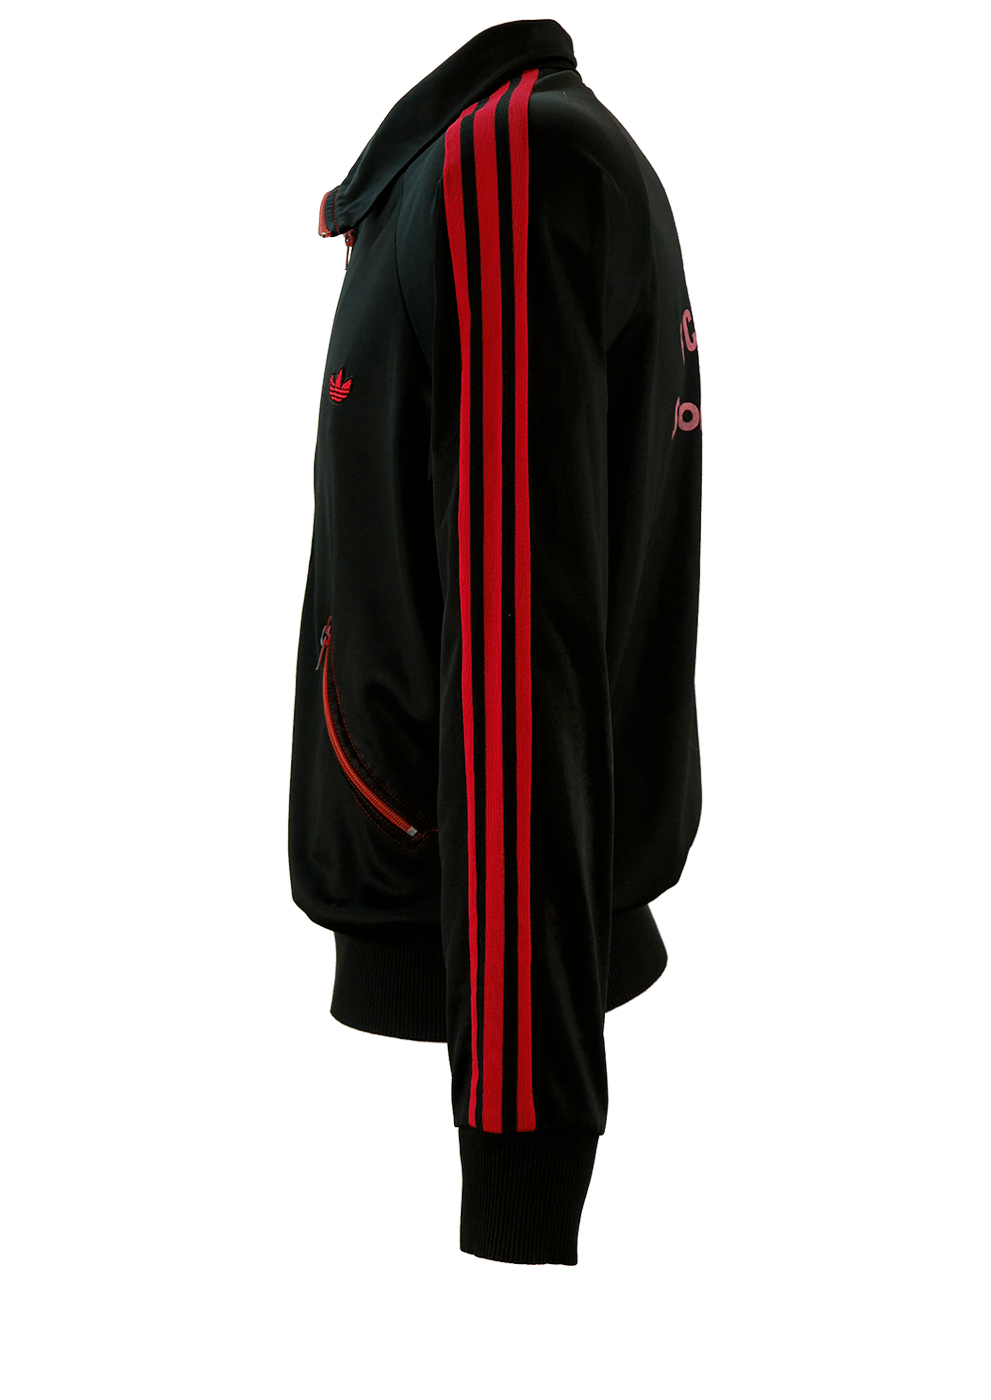 Vintage 70's Adidas Black Track Jacket with Red Stripes and Curved